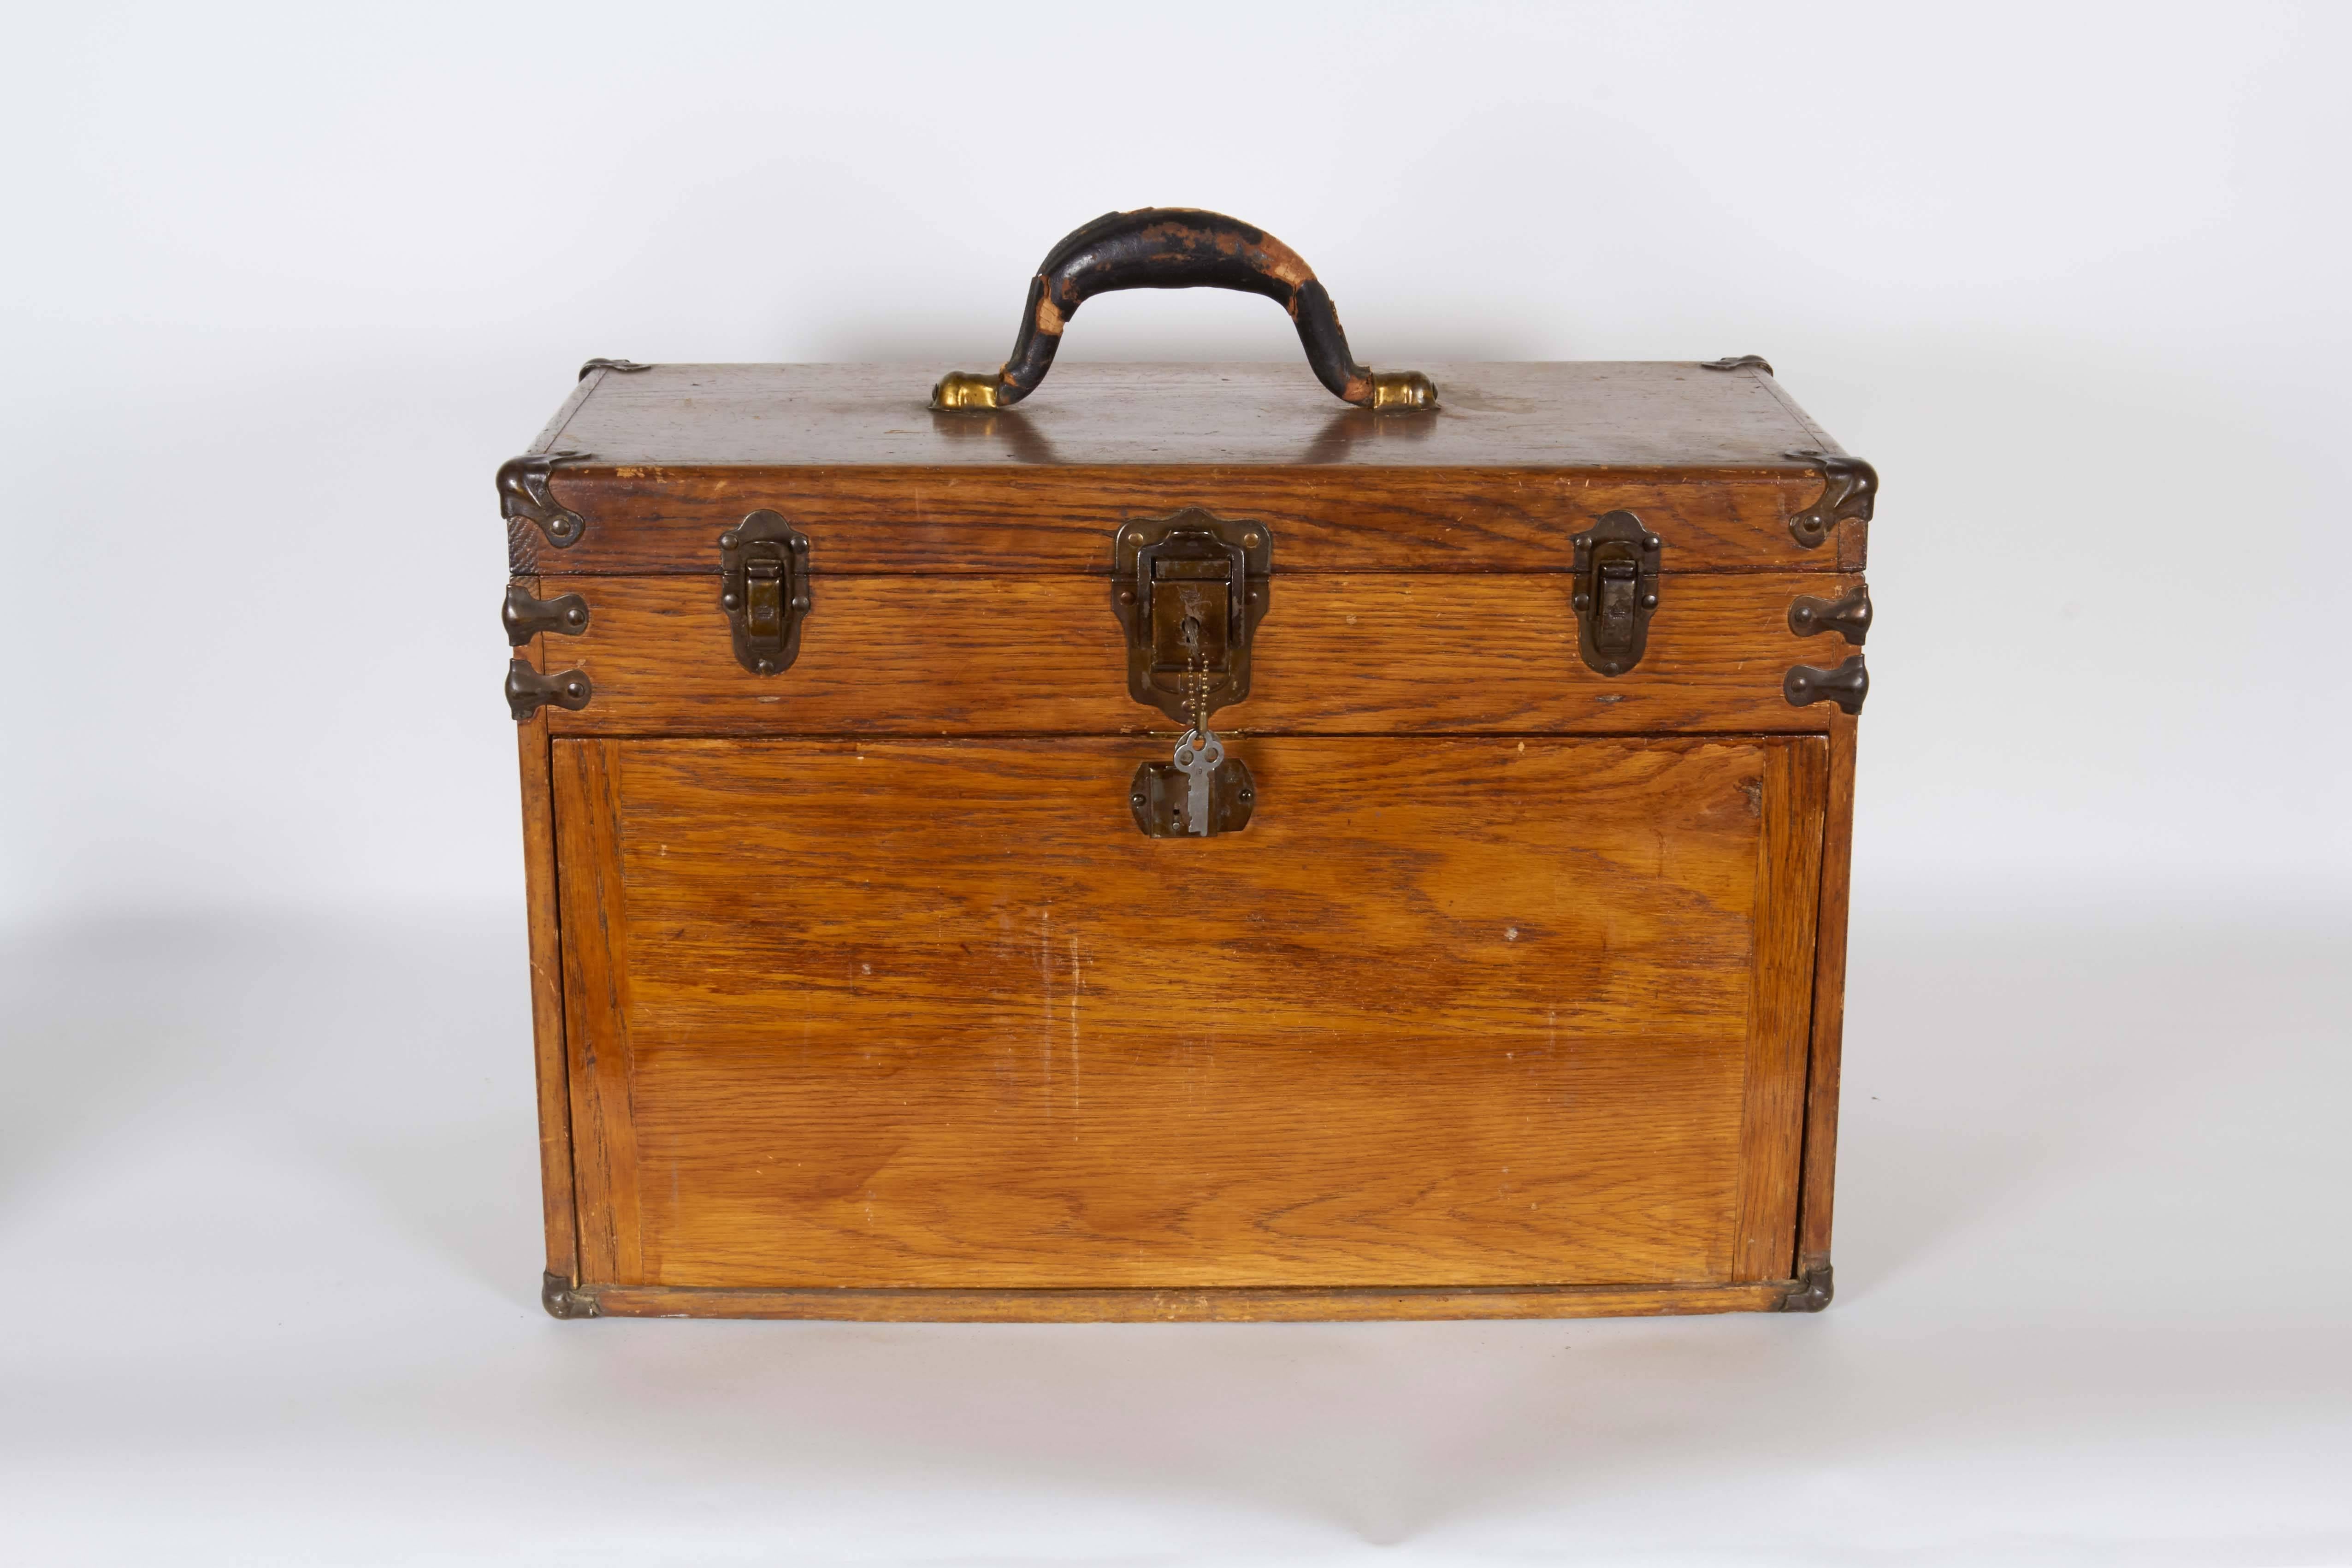 An oakwood toolbox, produced circa 1920s-1930s, with leather handle on hinged lid, interior lined with green felt and the original mirror. Below, a locking panel, which may slide in and out from the base, reveals seven drawers of varying sizes. This